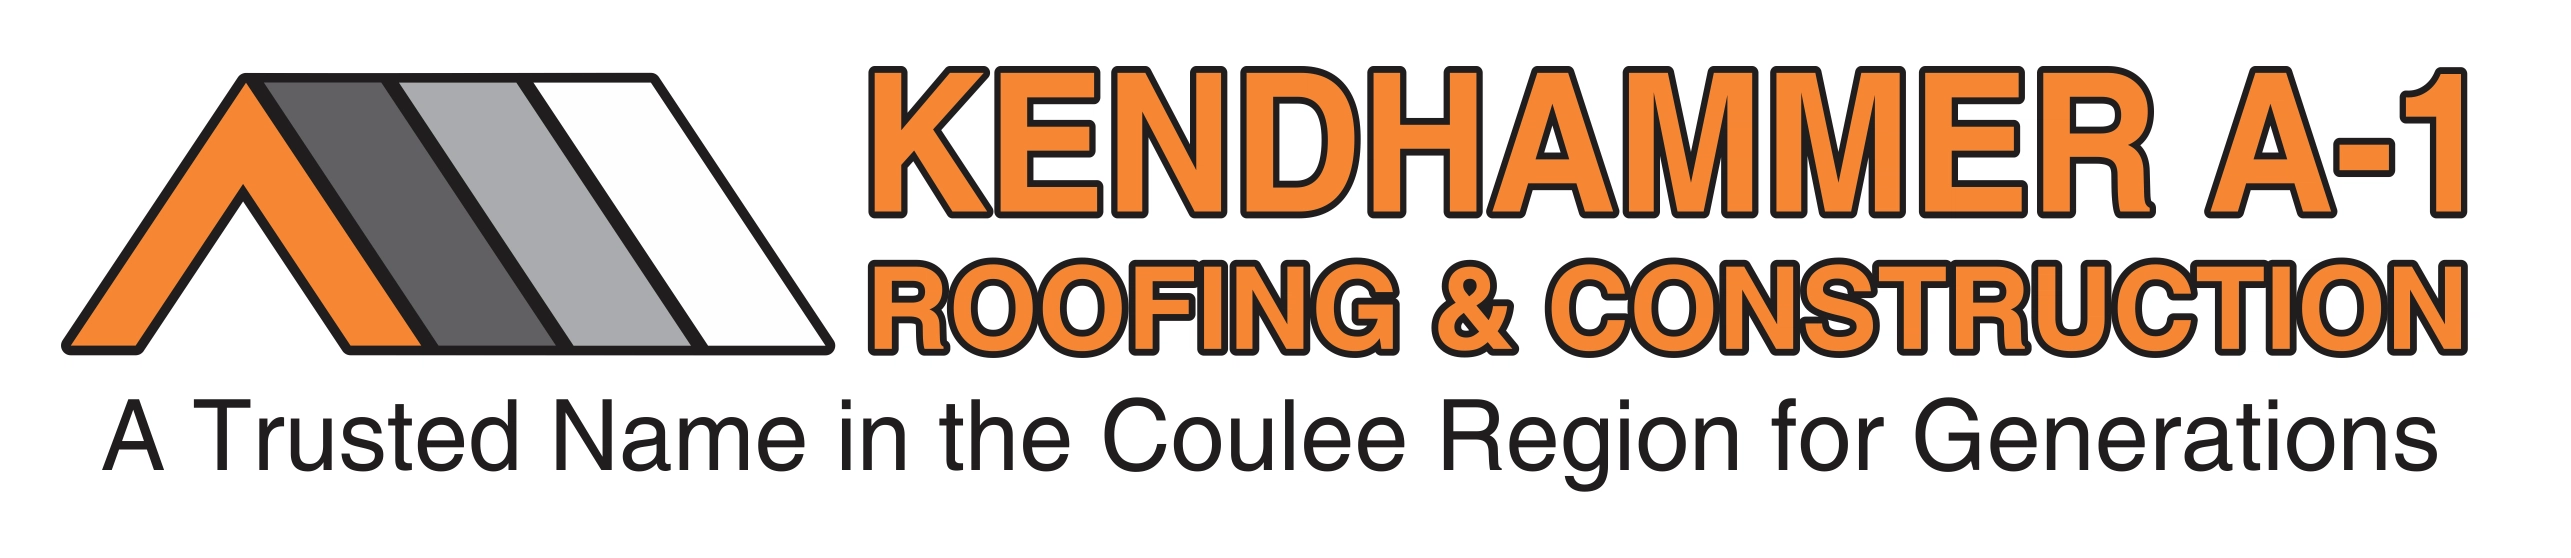 Kendhammer A-1 Roofing and Construction Logo